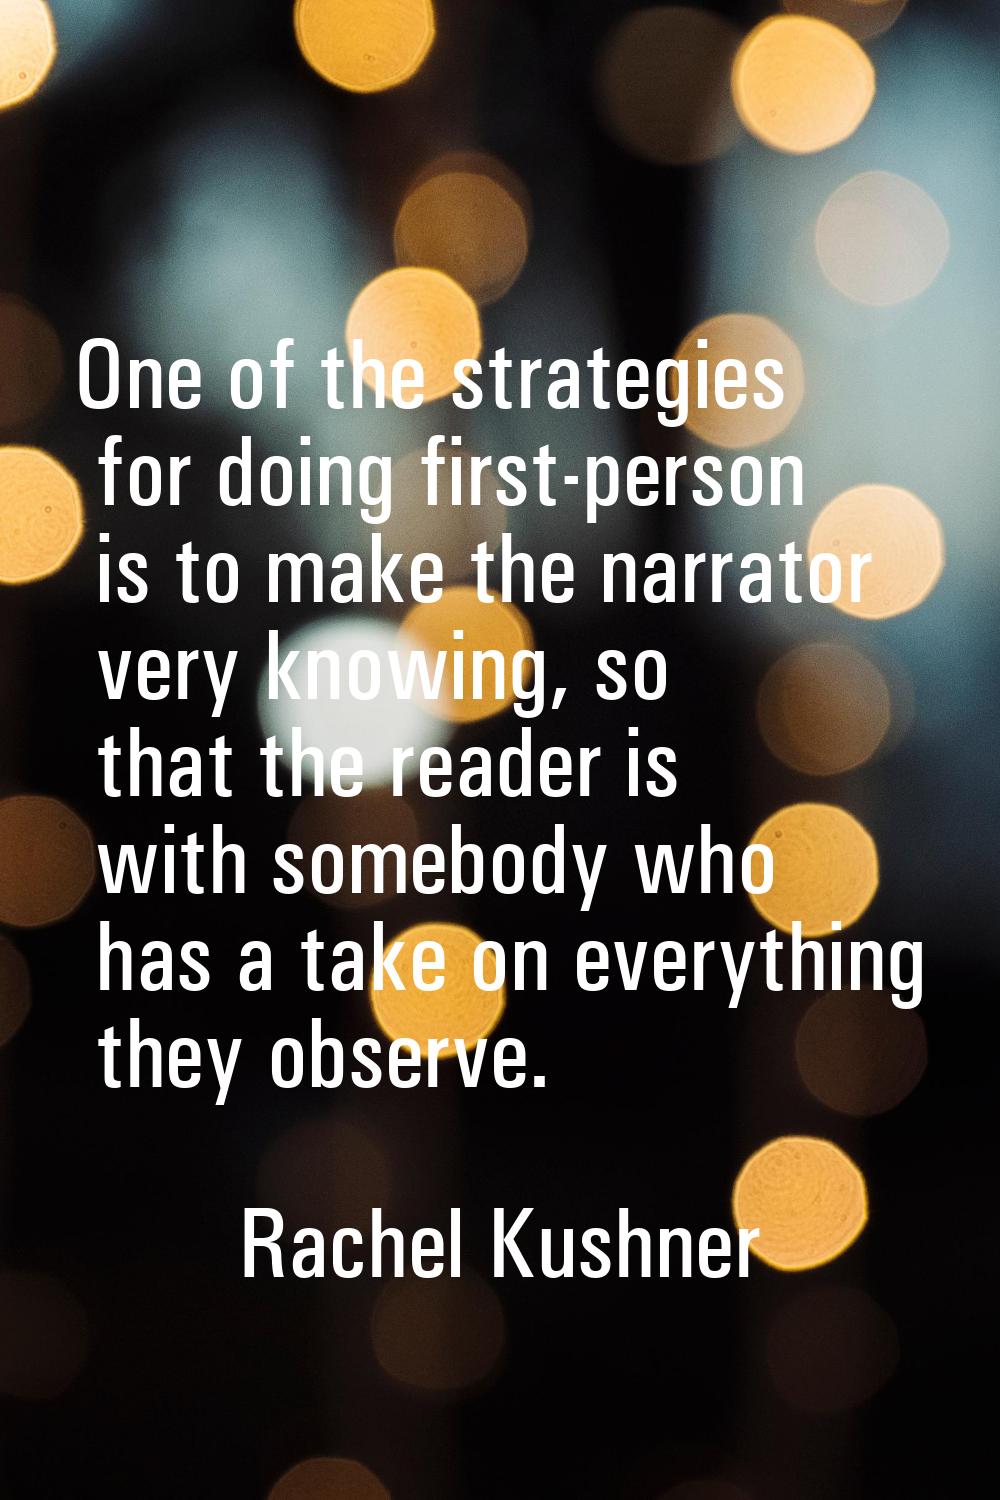 One of the strategies for doing first-person is to make the narrator very knowing, so that the read